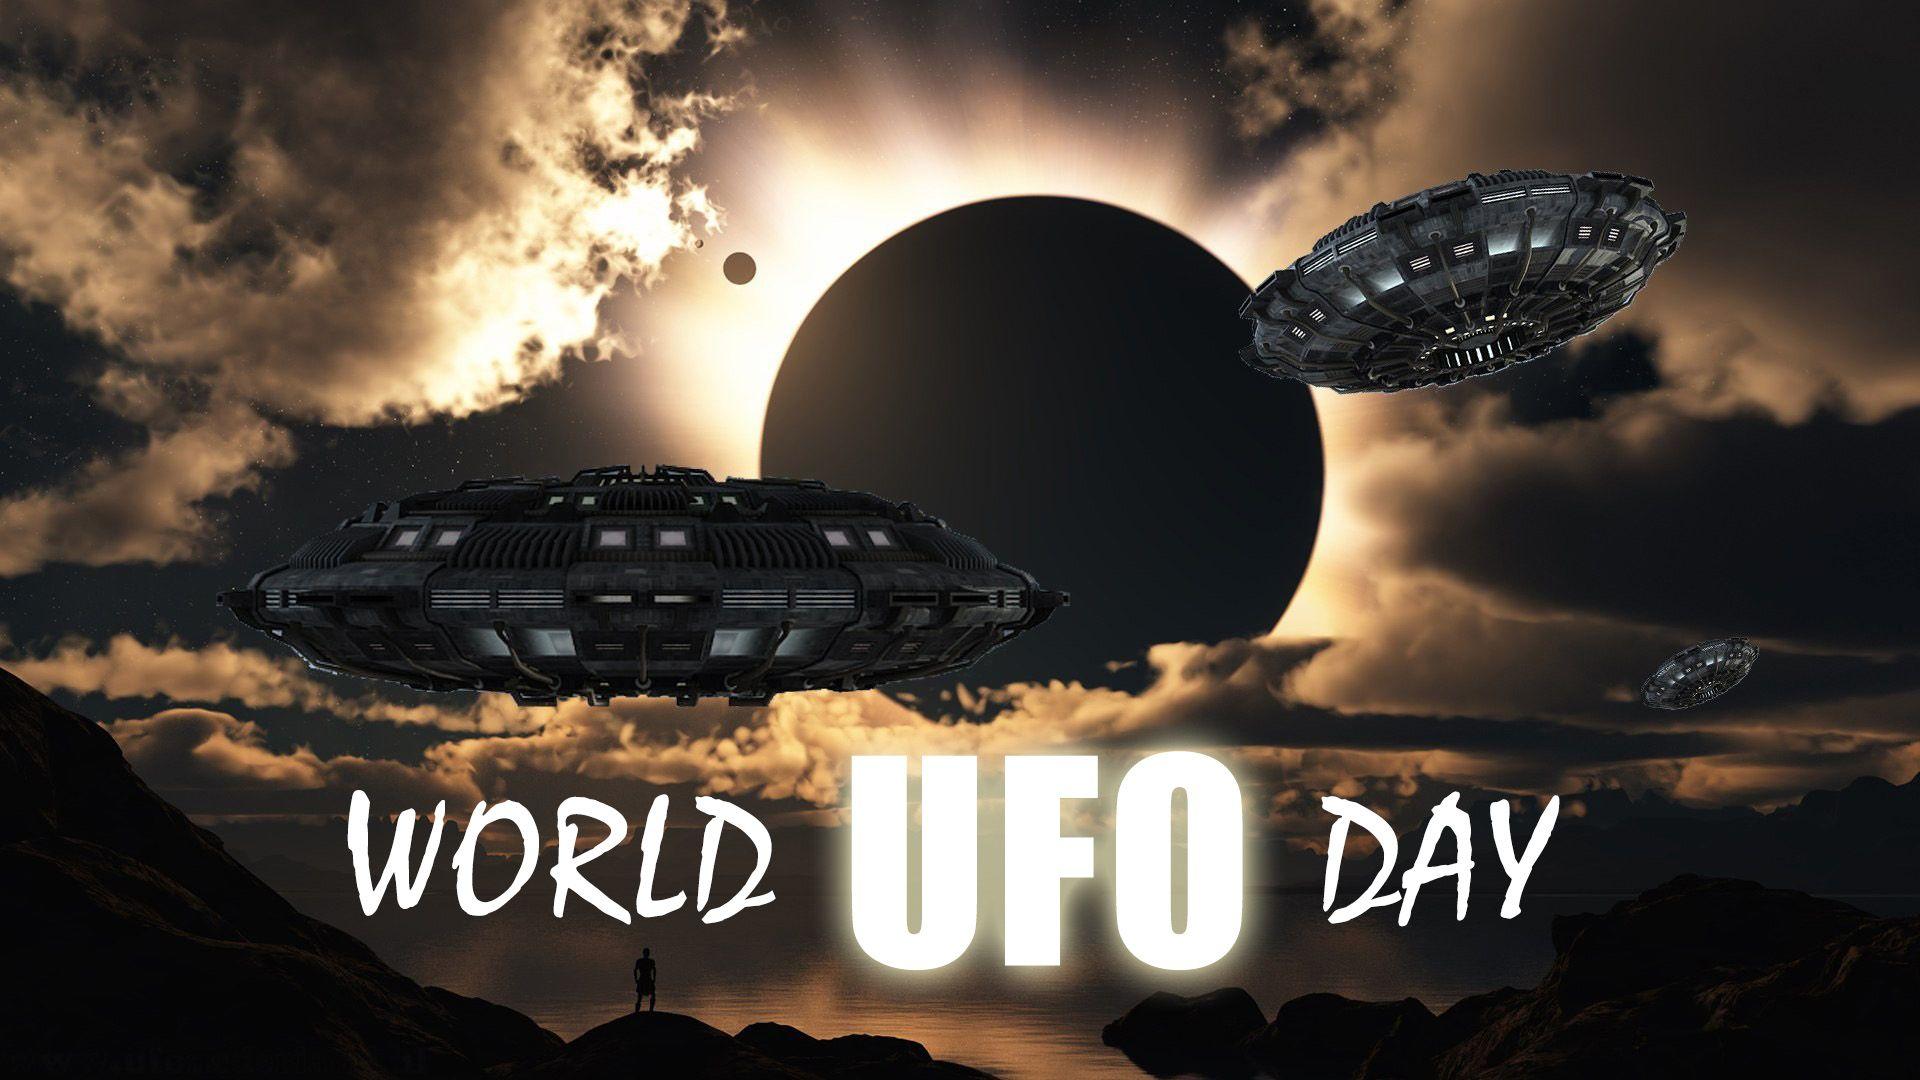 World Ufo Day Unidentified Flying Object Saucers Sky HD Wallpaper